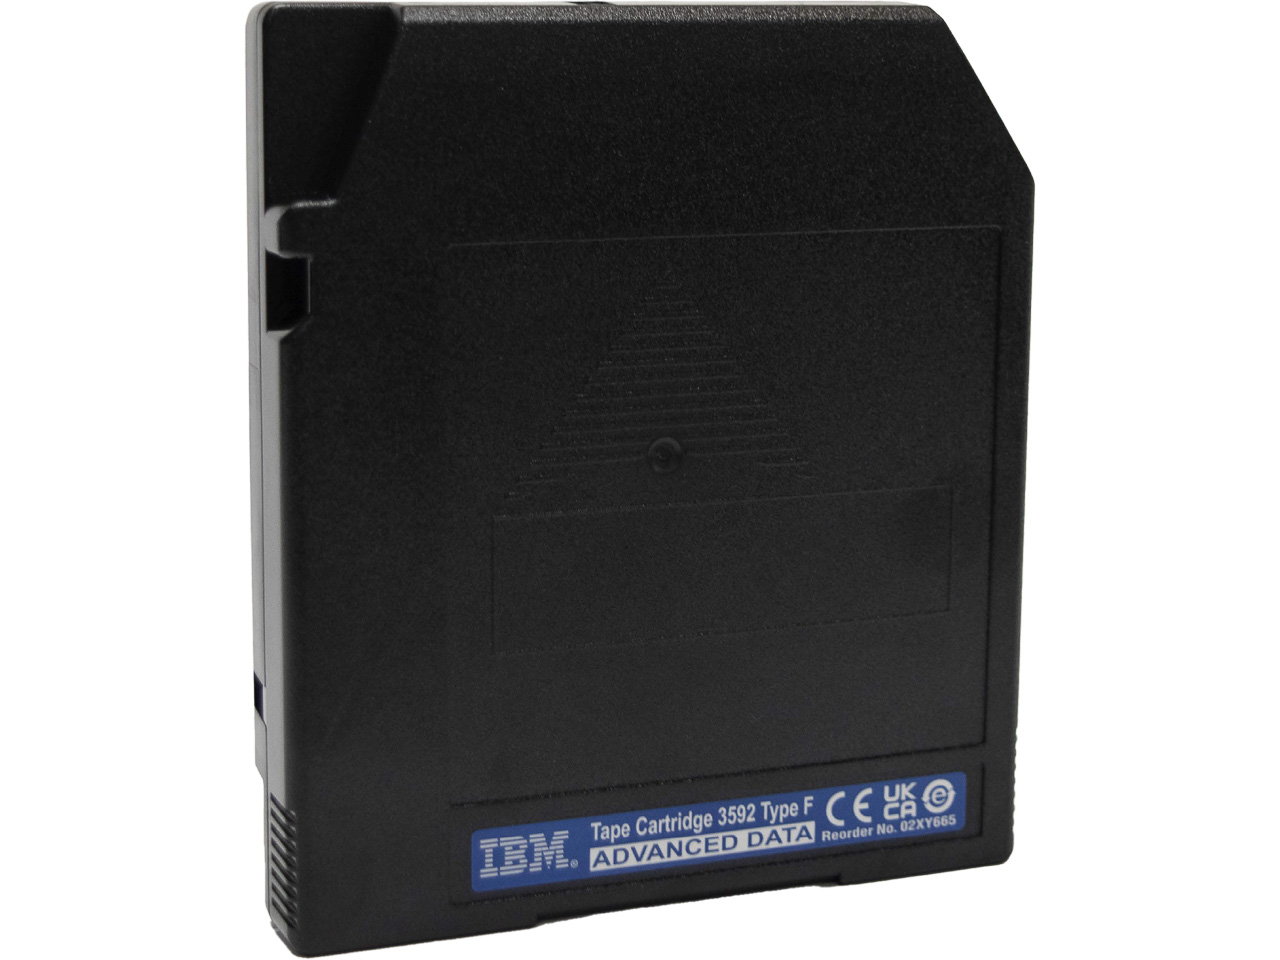 IBM MAGSTAR DC 3592F ADVANCED 02XY665 without label 50TB 1